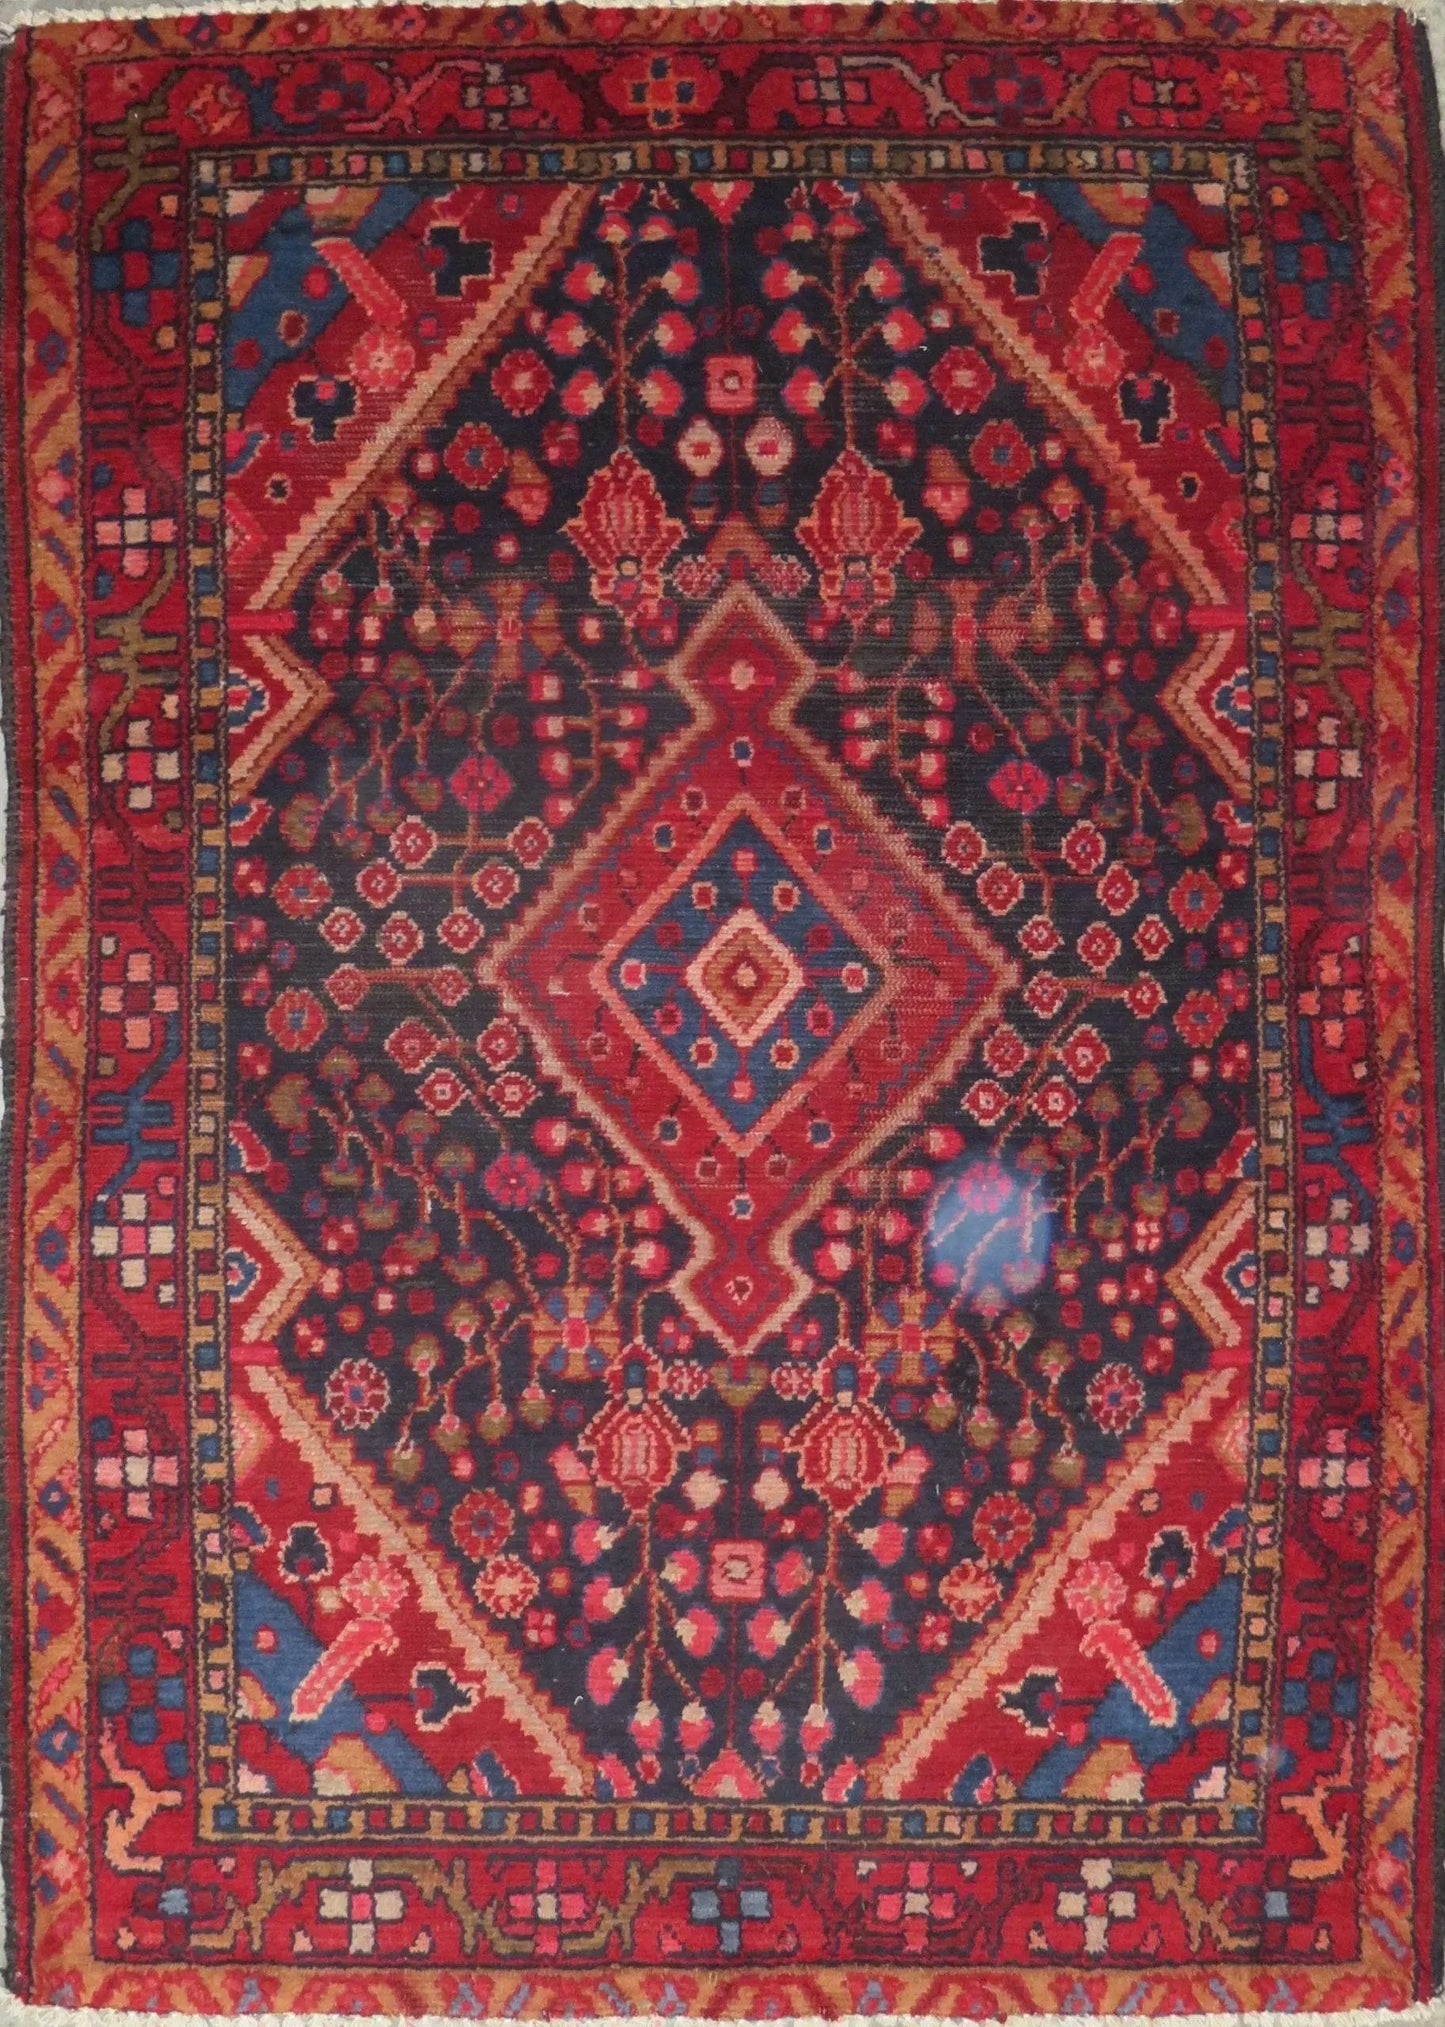 Hand-Knotted Persian Wool Rug _ Luxurious Vintage Design, 5'6" x 3'9", Artisan Crafted